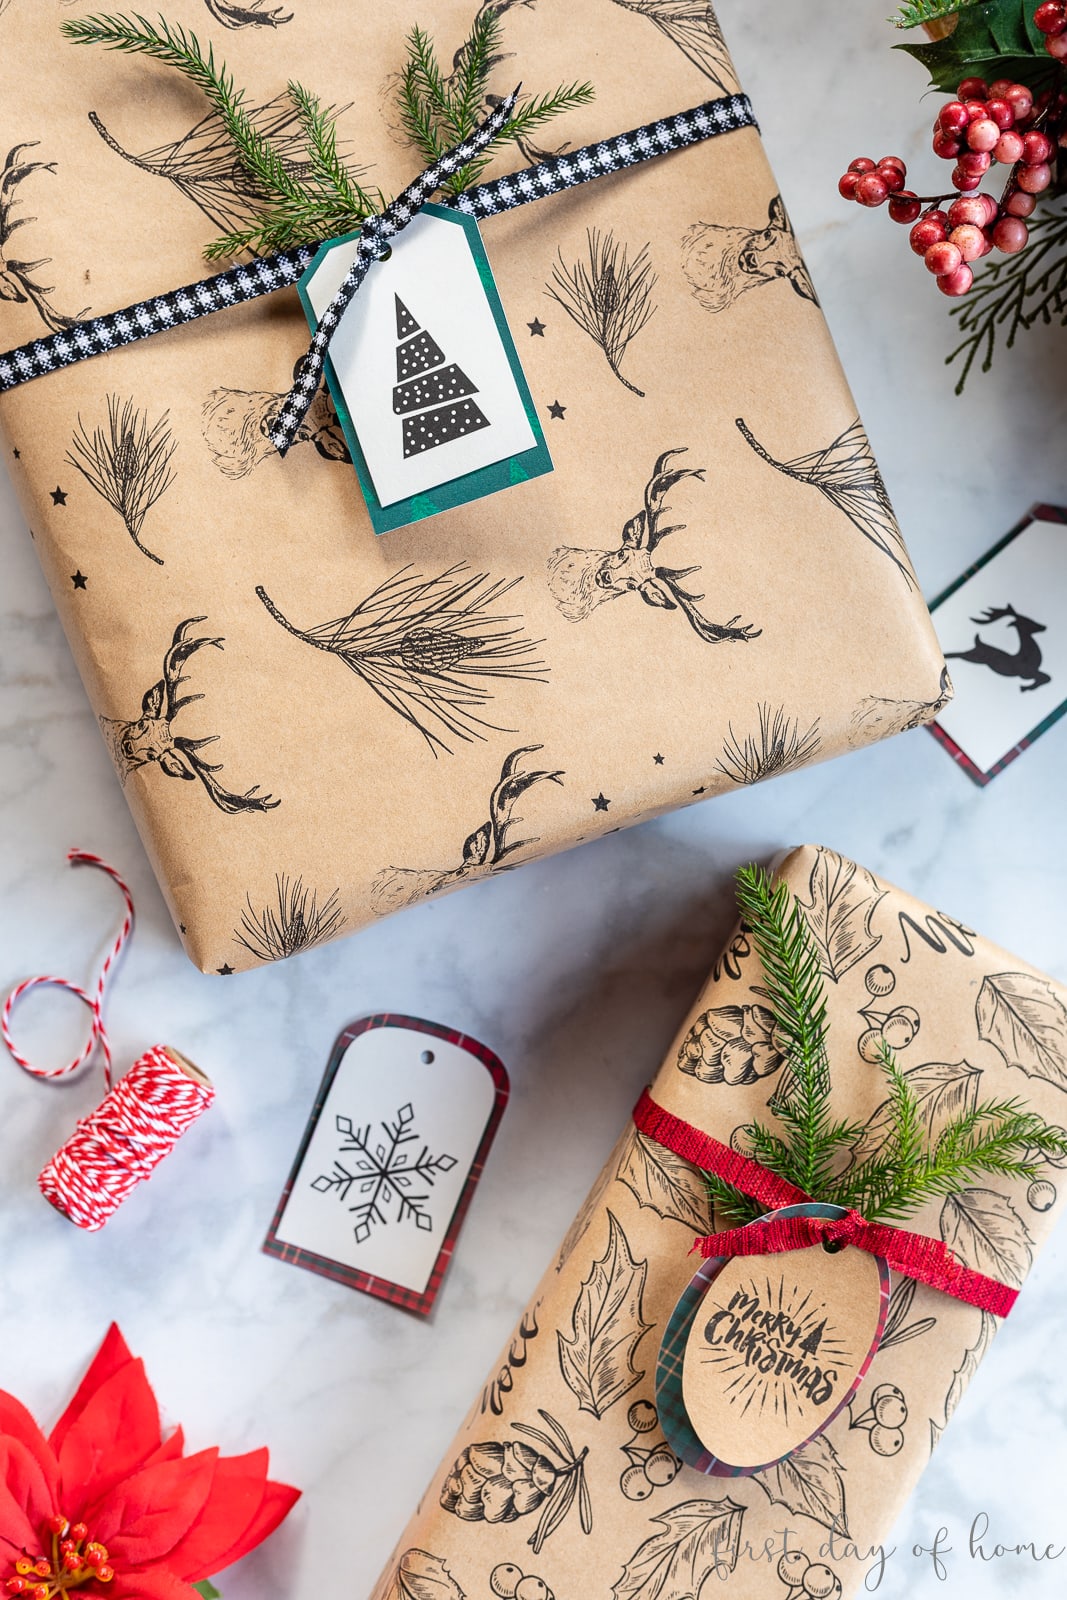 Christmas gifts wrapped with brown paper and free printable Christmas gift tags with rustic woodland theme